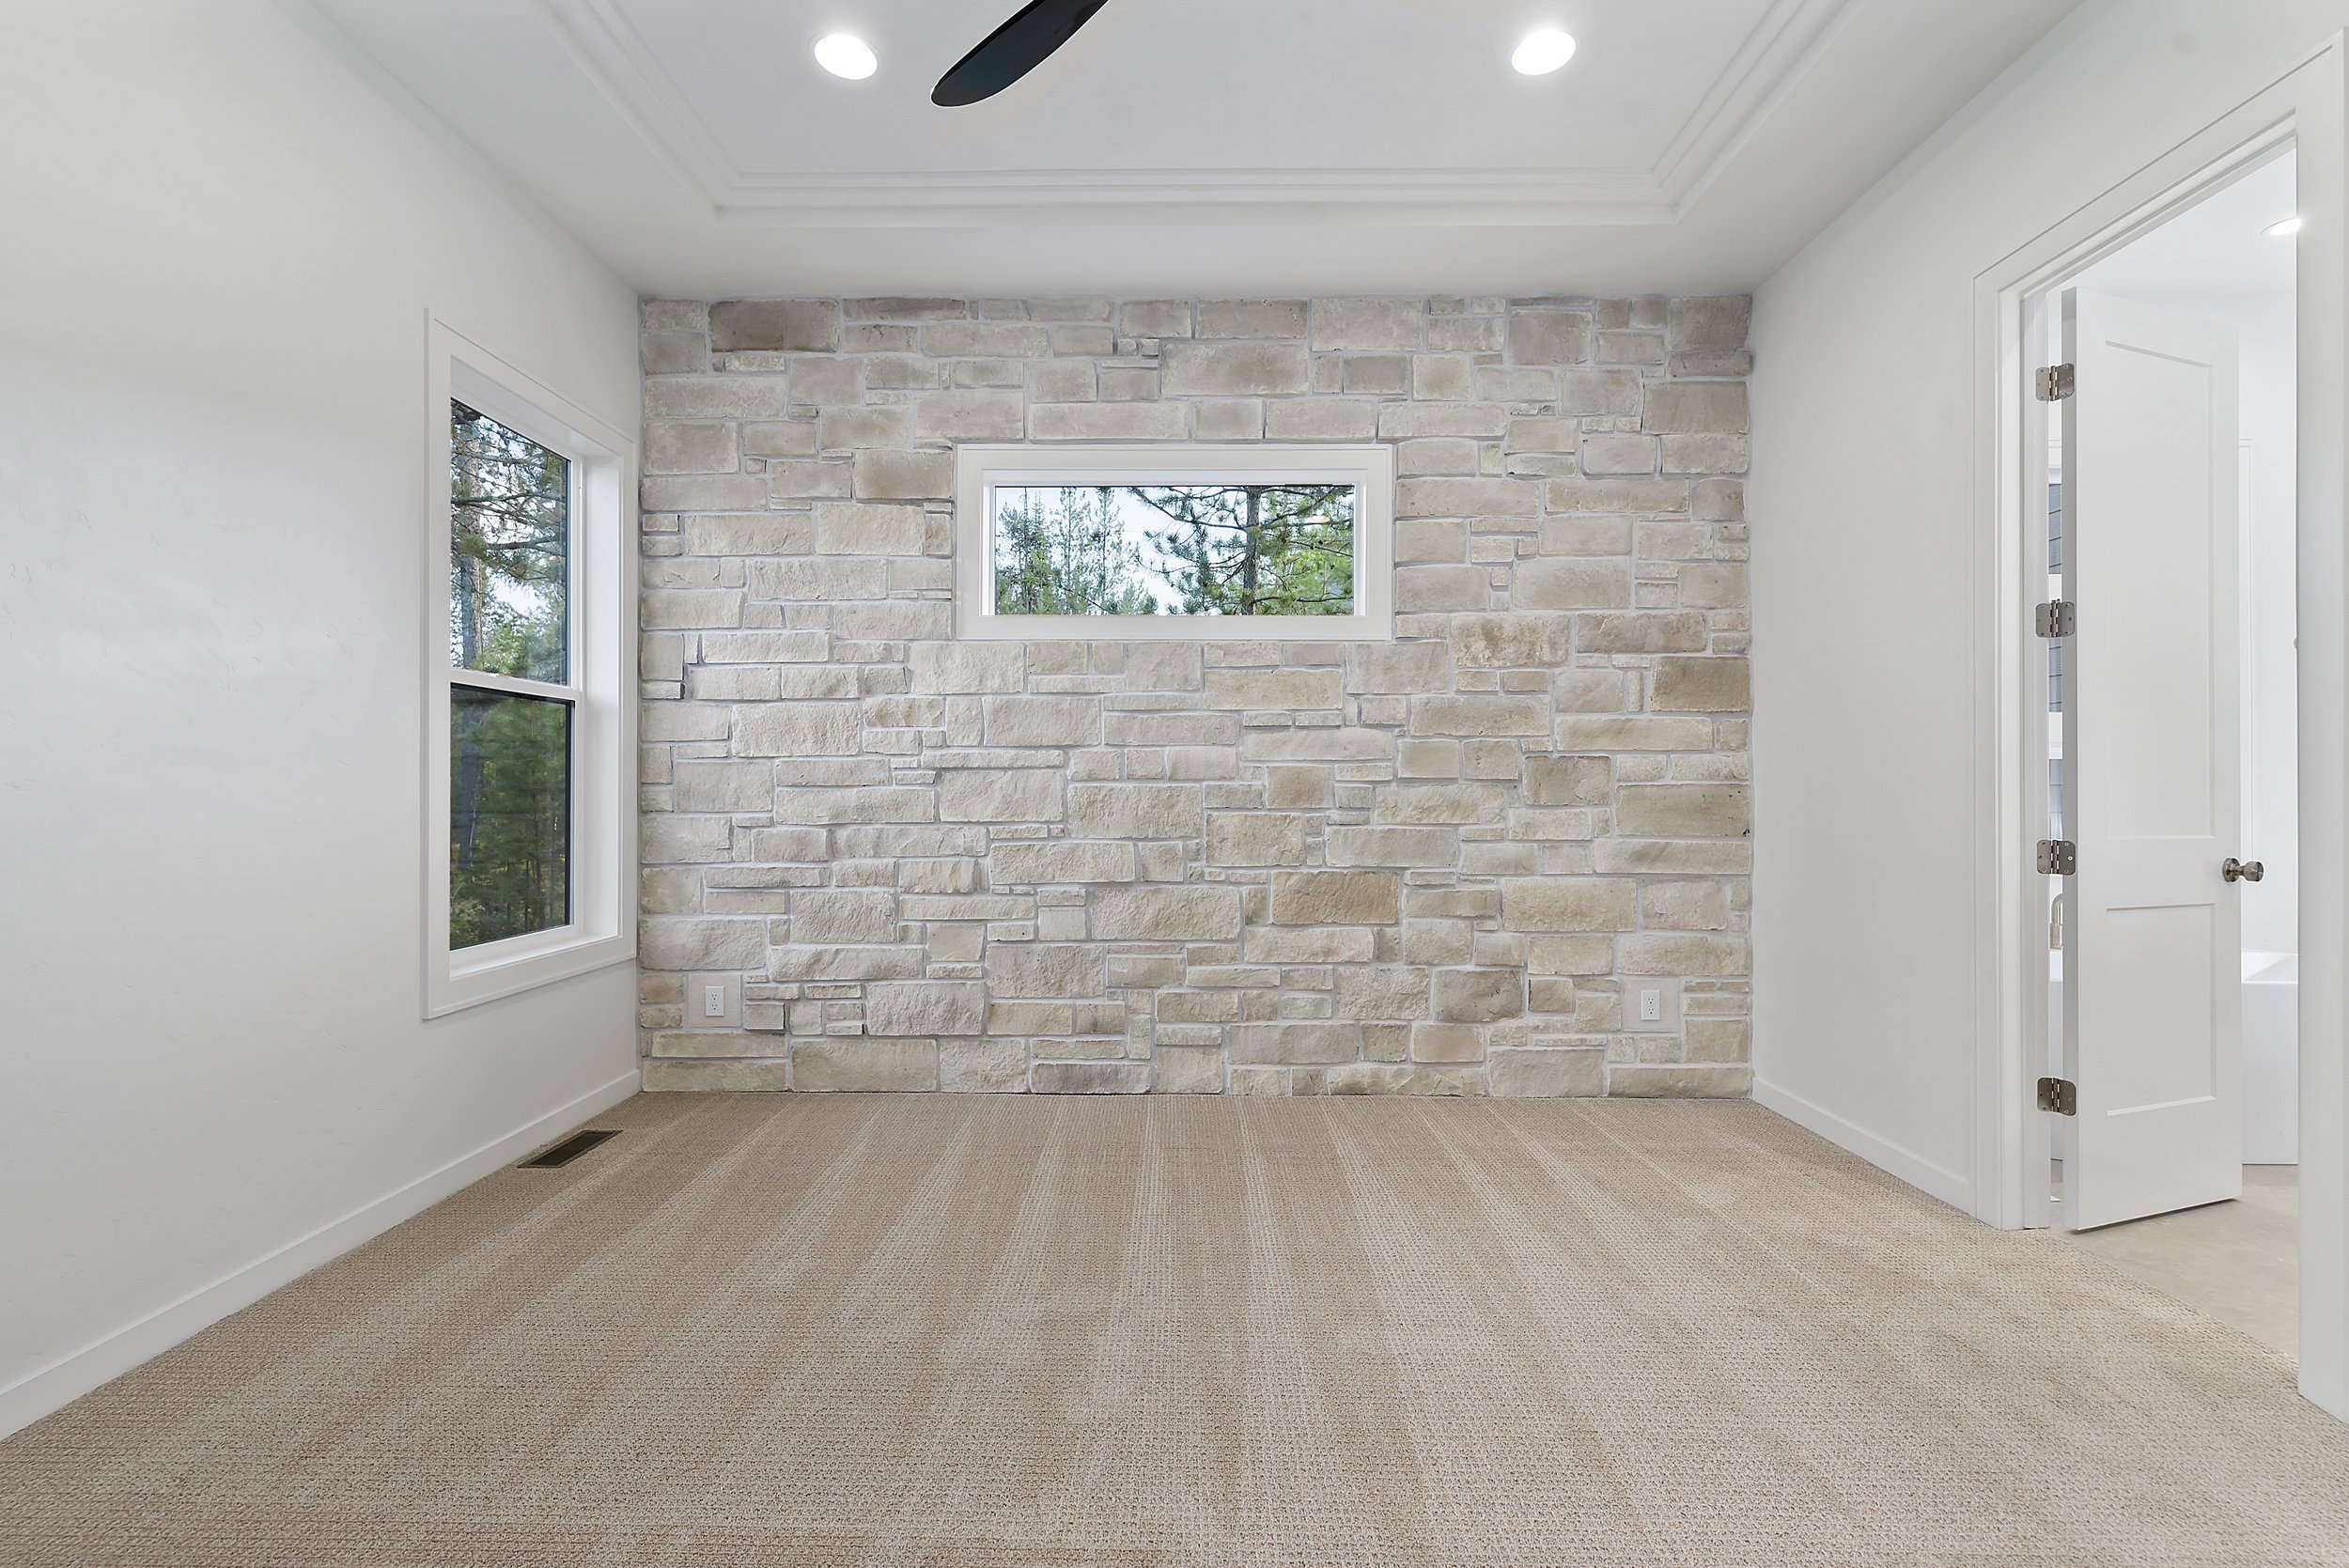  STONE WALL, NEW CONSTRUCTION, NEW CARPET, NEW HOME, DONNELLY IDAHO, REAL ESTATE 